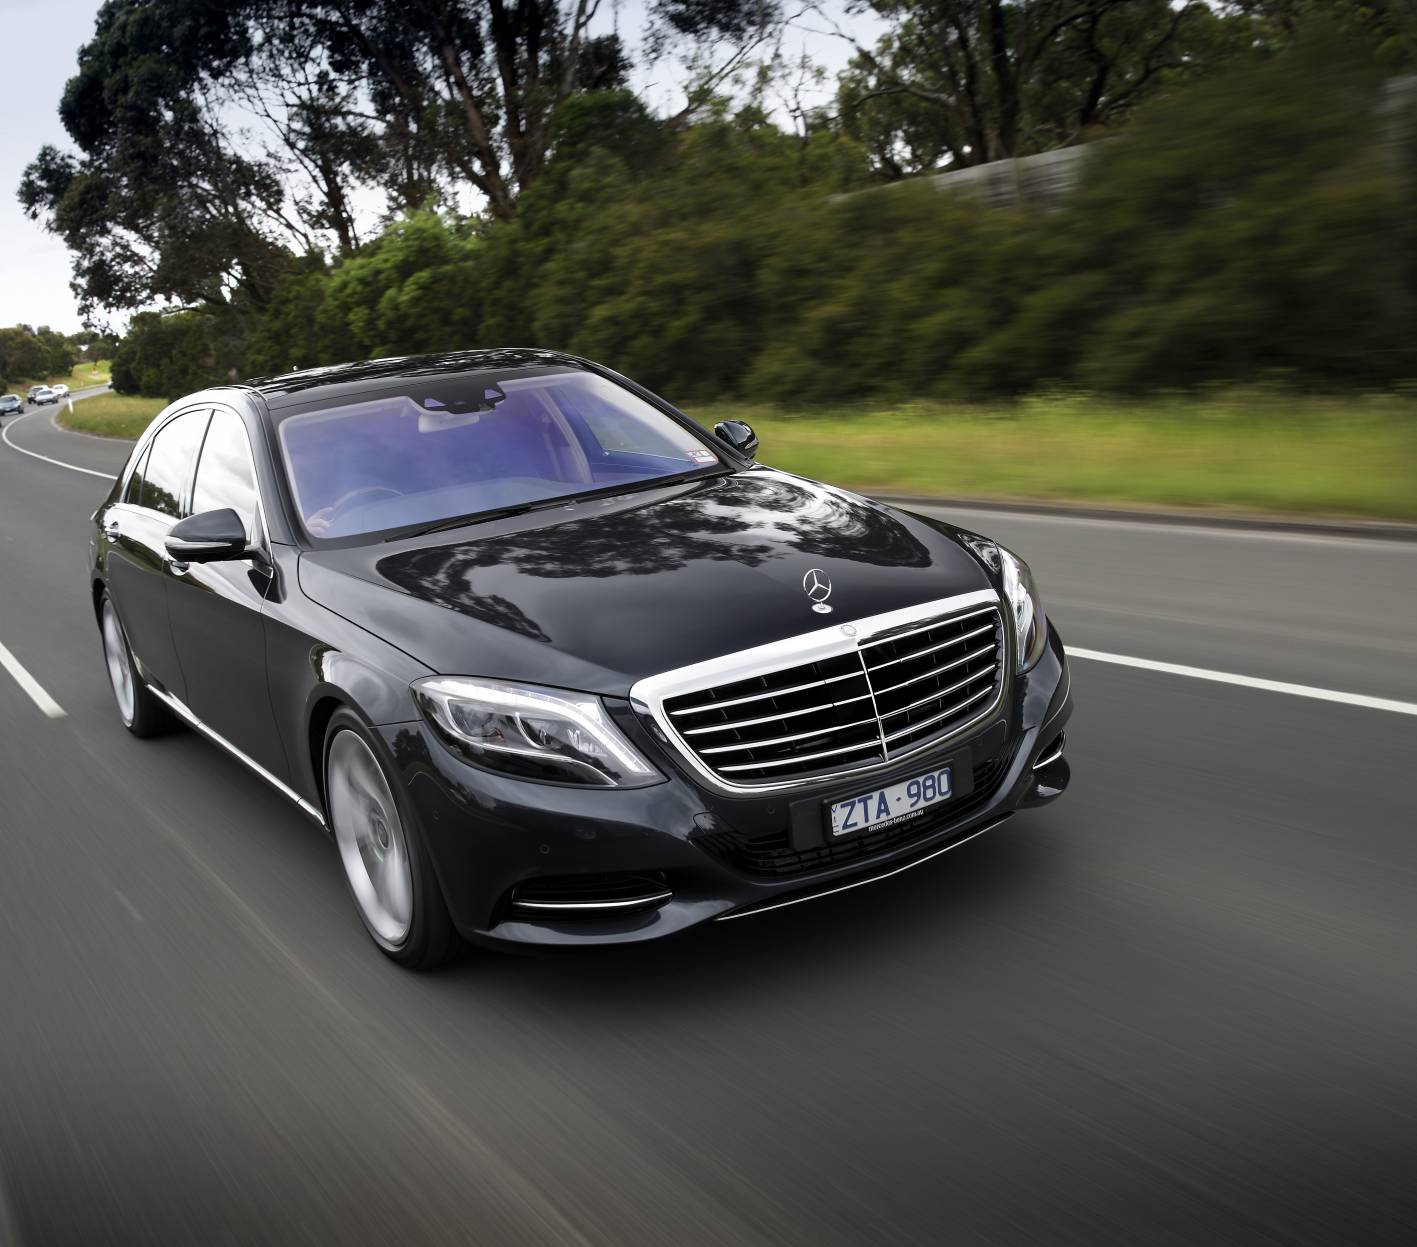 2014 Mercedes-Benz S-Class: pricing and specifications - photos | CarAdvice